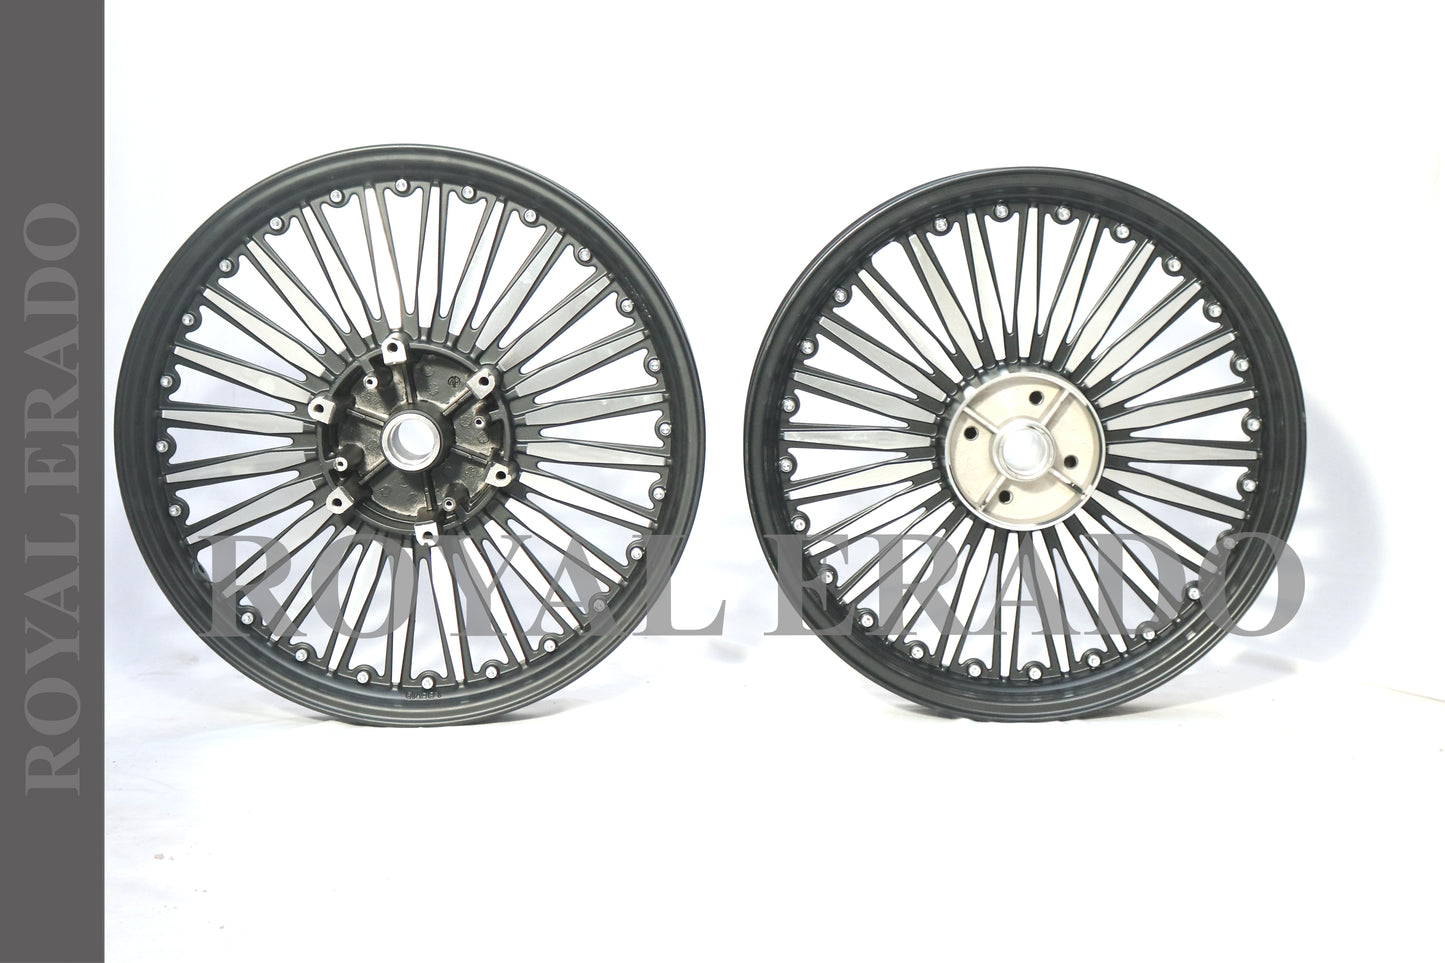 24 Spokes alloy wheel for thunderbird and classic double disc